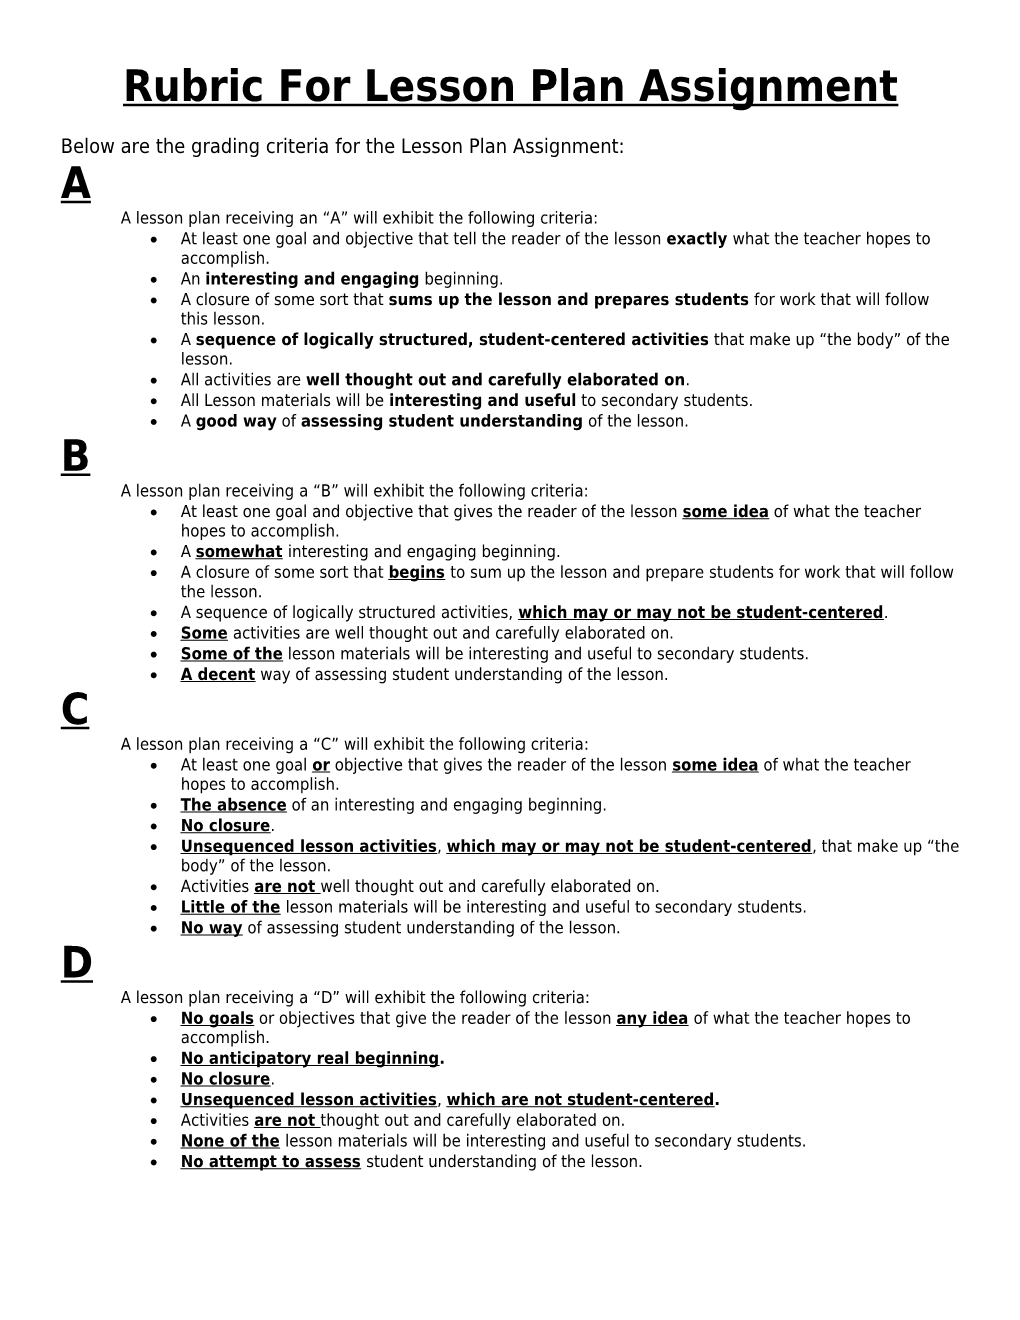 Rubric for Lesson Plan Assignment